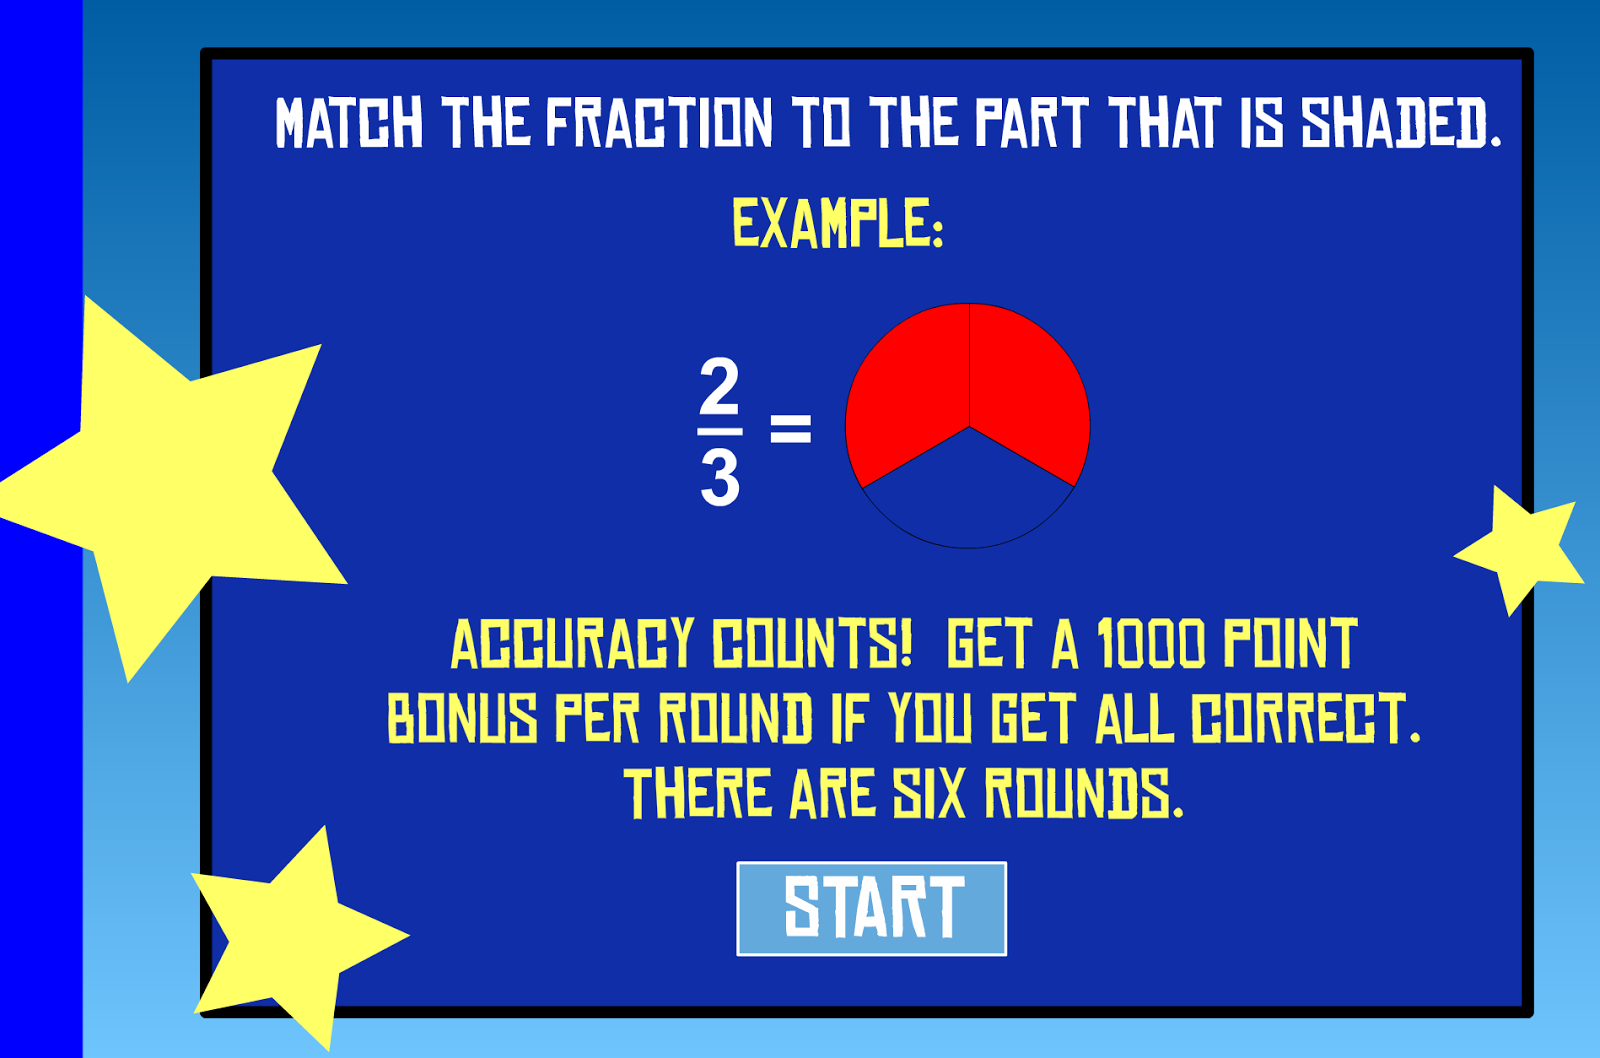 http://www.sheppardsoftware.com/mathgames/fractions/memory_fractions2.swf